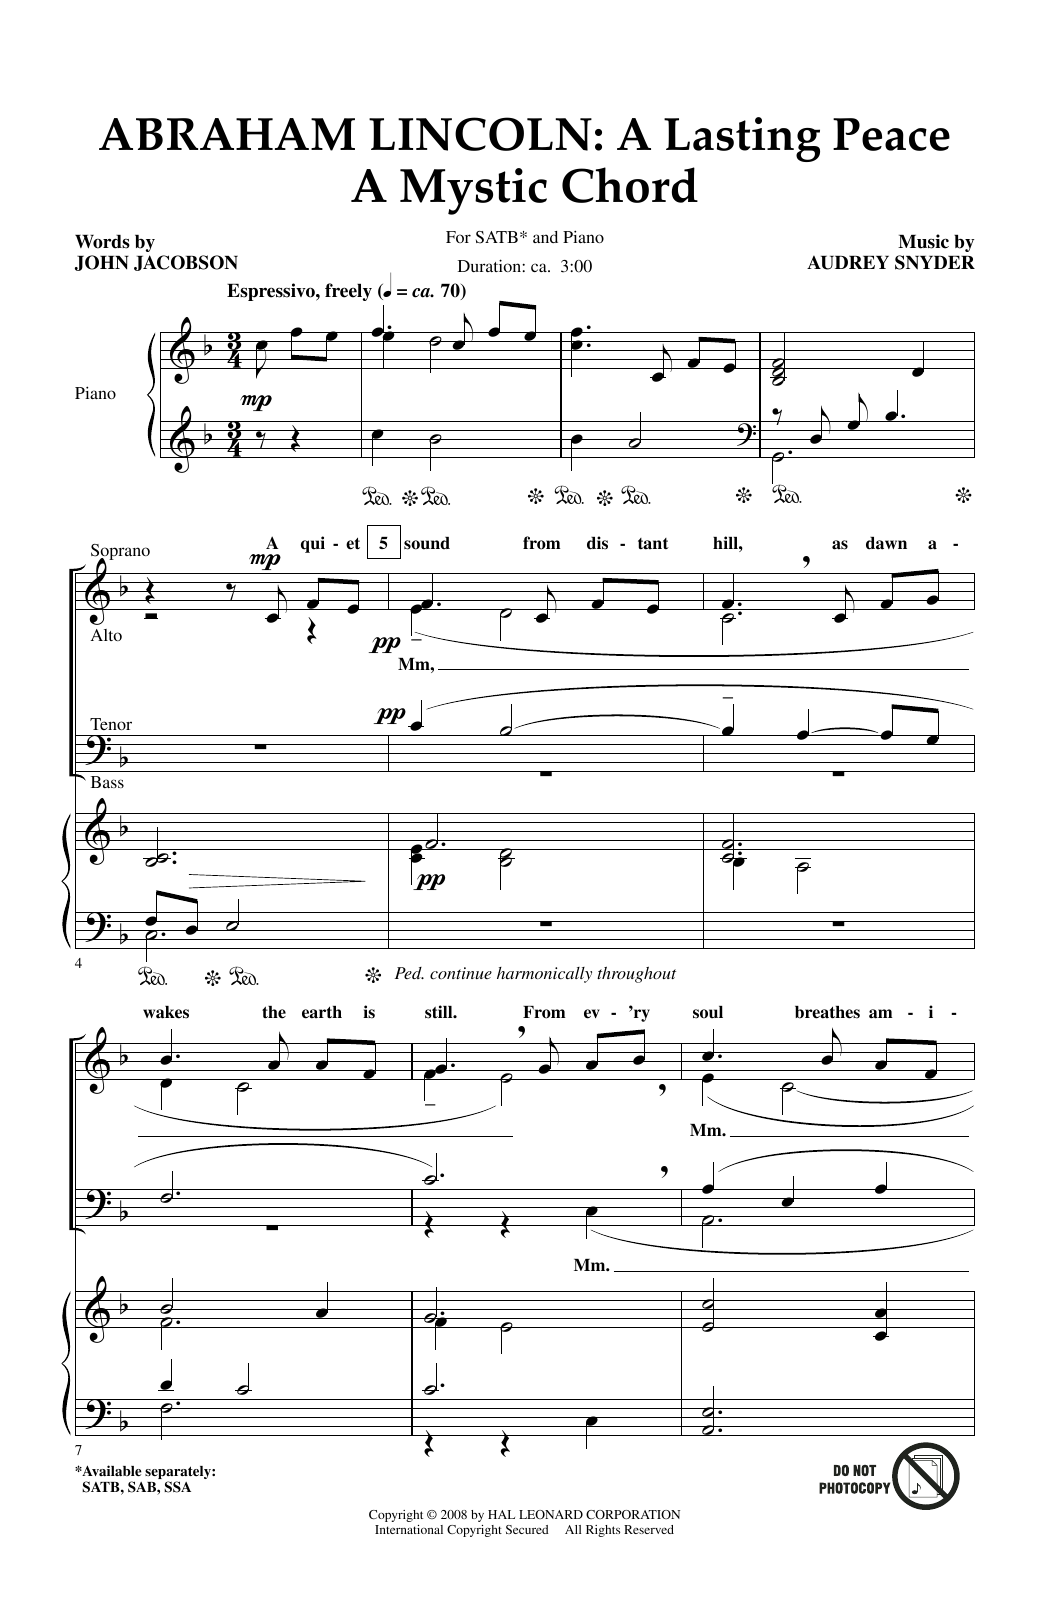 Download Audrey Snyder Abraham Lincoln: A Lasting Peace Sheet Music